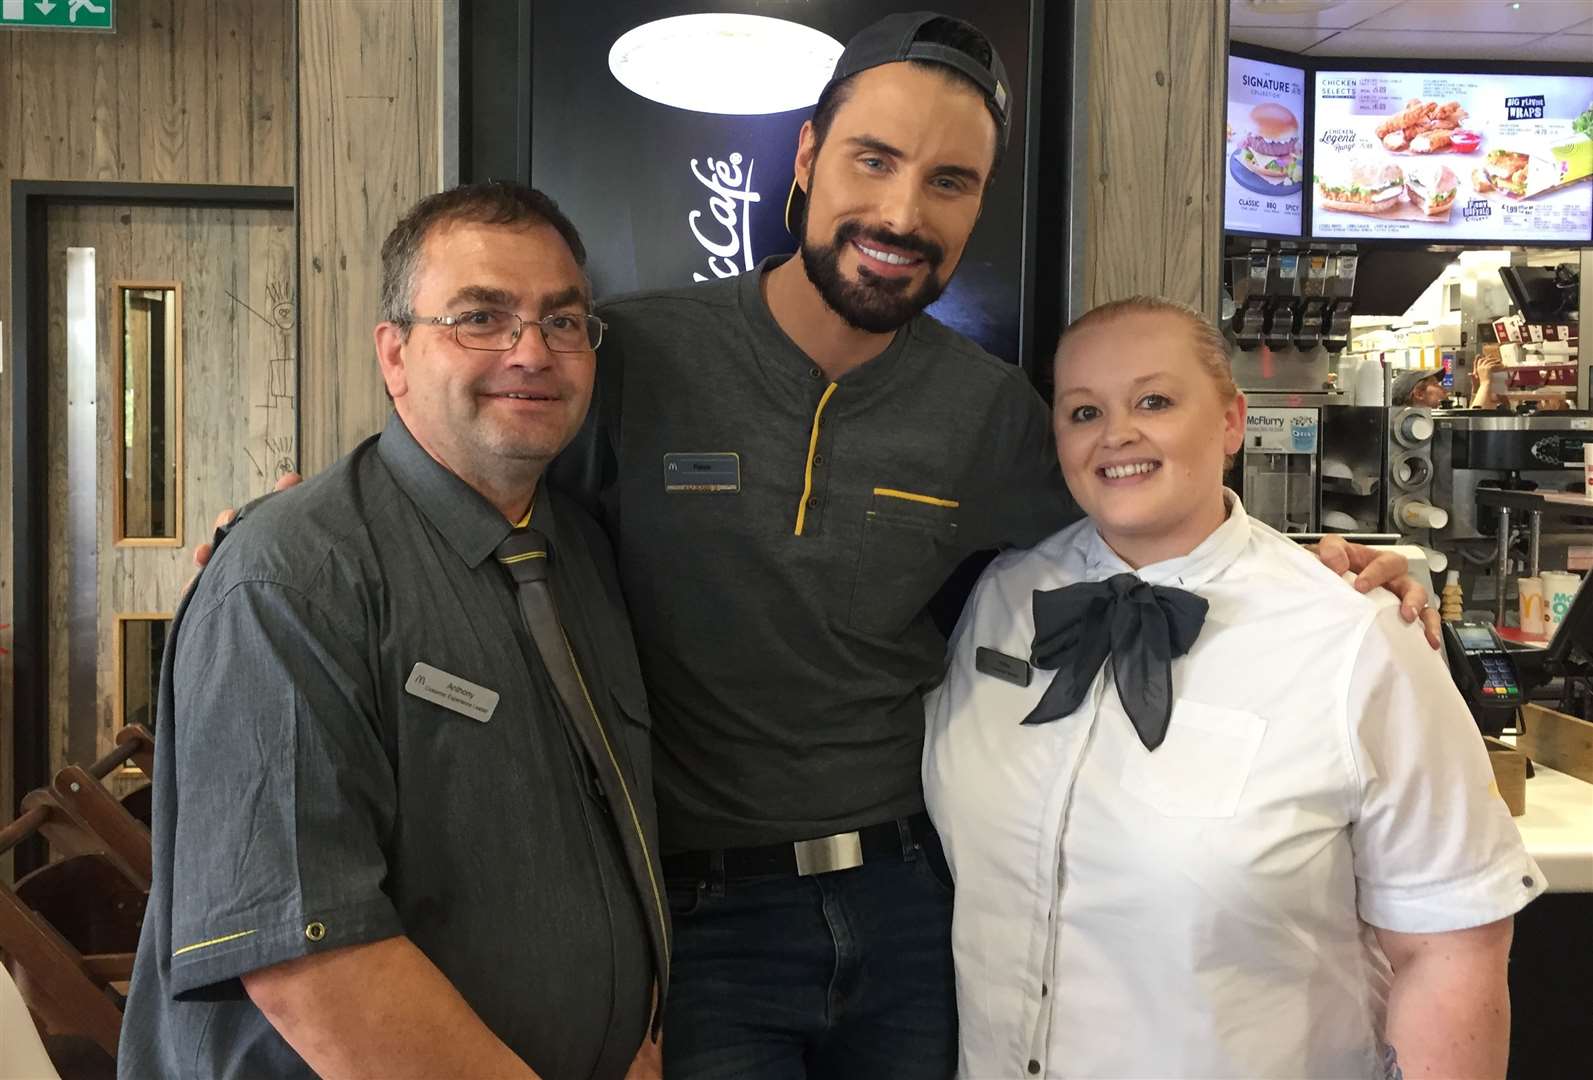 Rylan Clark-Neal with McDonald's staff Anthony Trice and Hollie Weeks